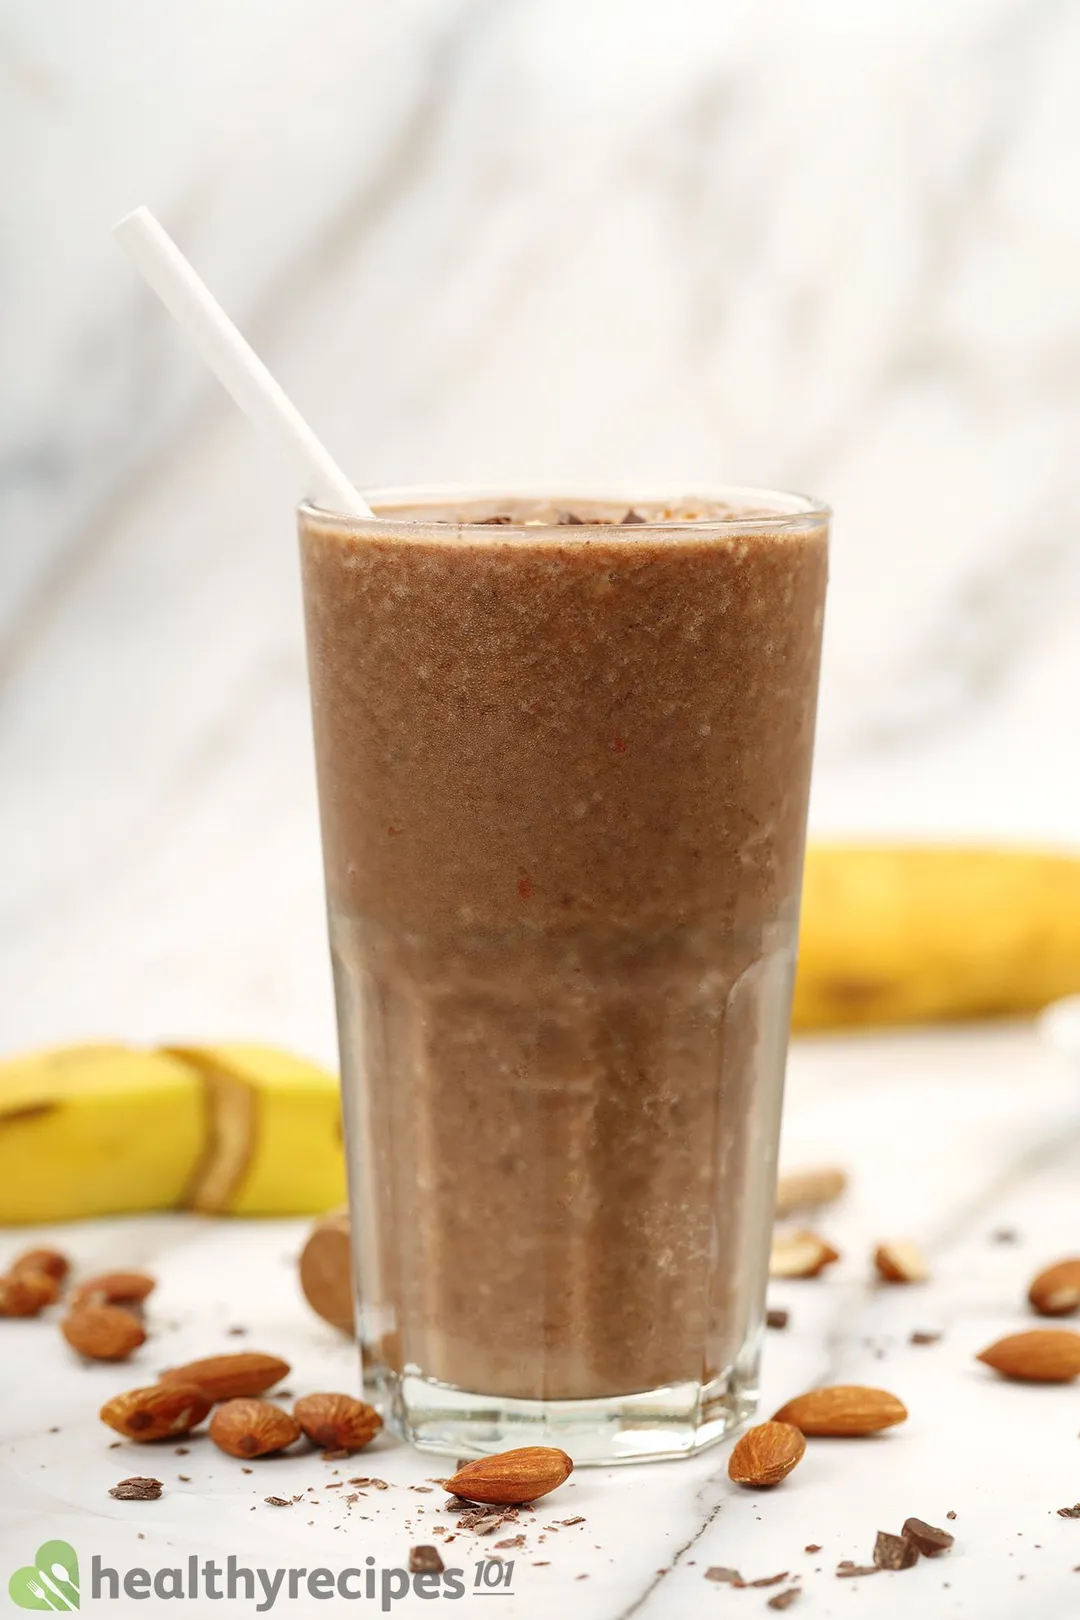 A glass of chocolate peanut butter banana placed on a marbled surface scattered with unpeeled bananas and almonds.